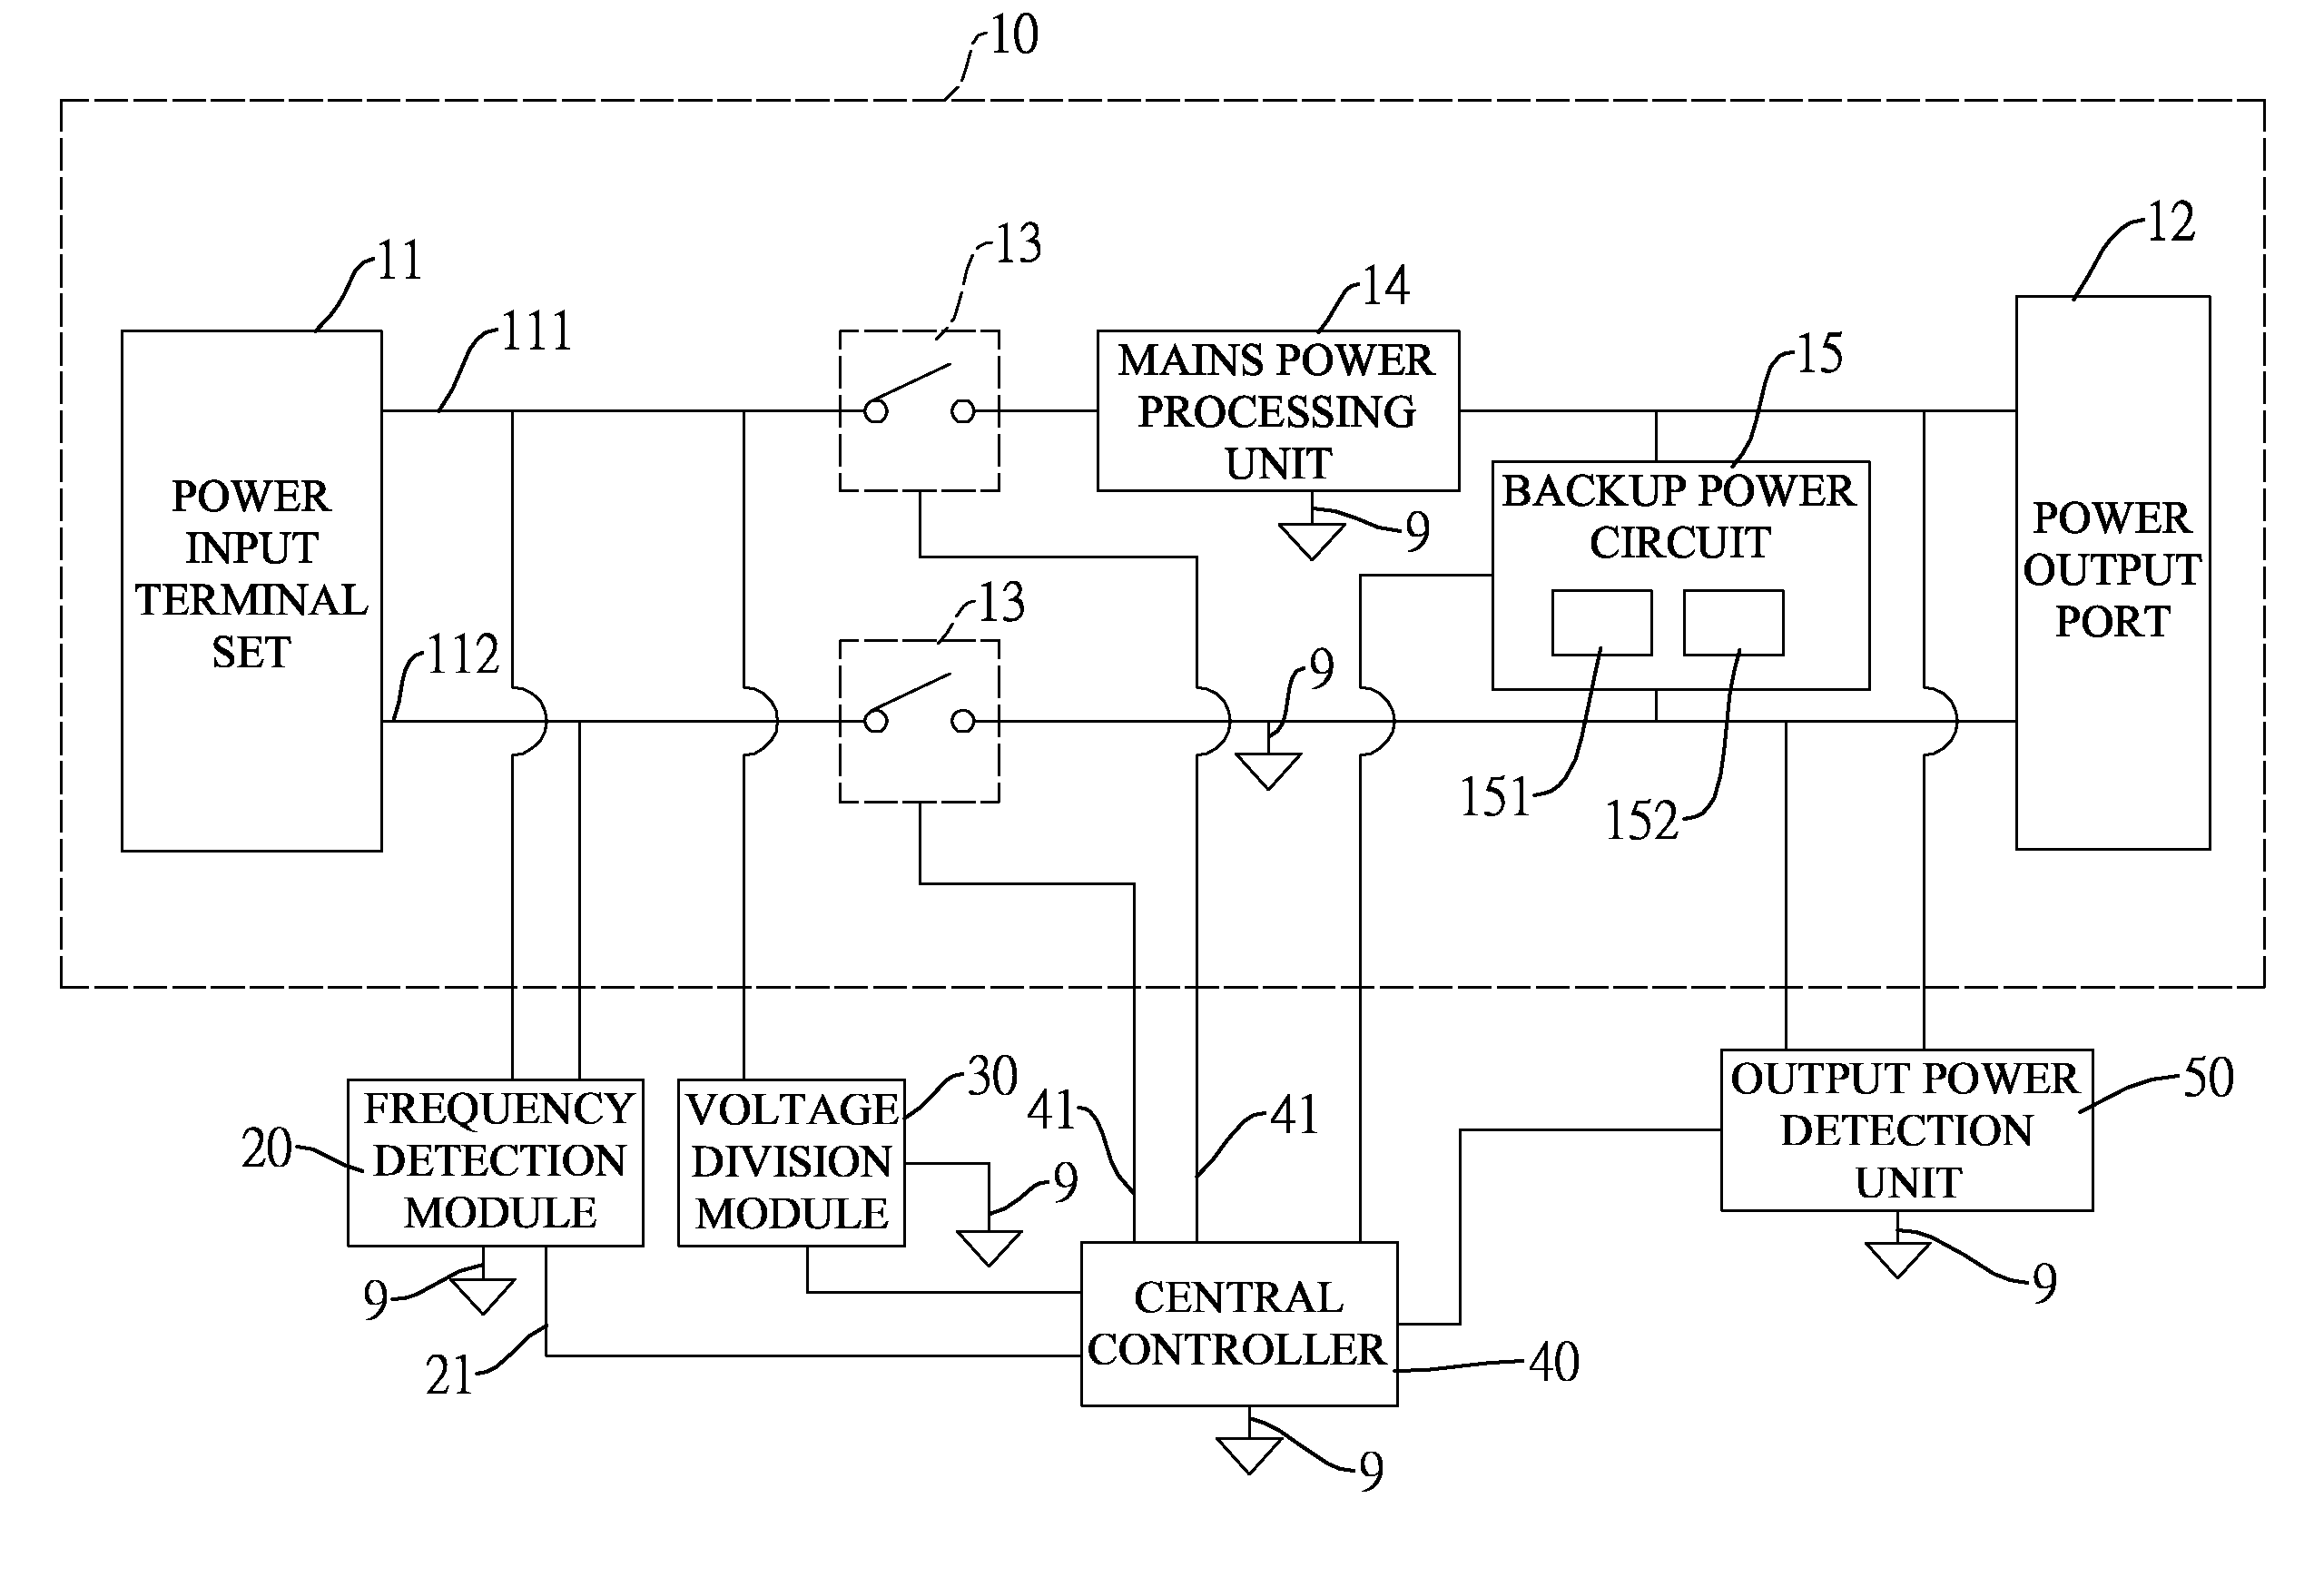 Uninterruptible power supply system having a simplified voltage detection circuit